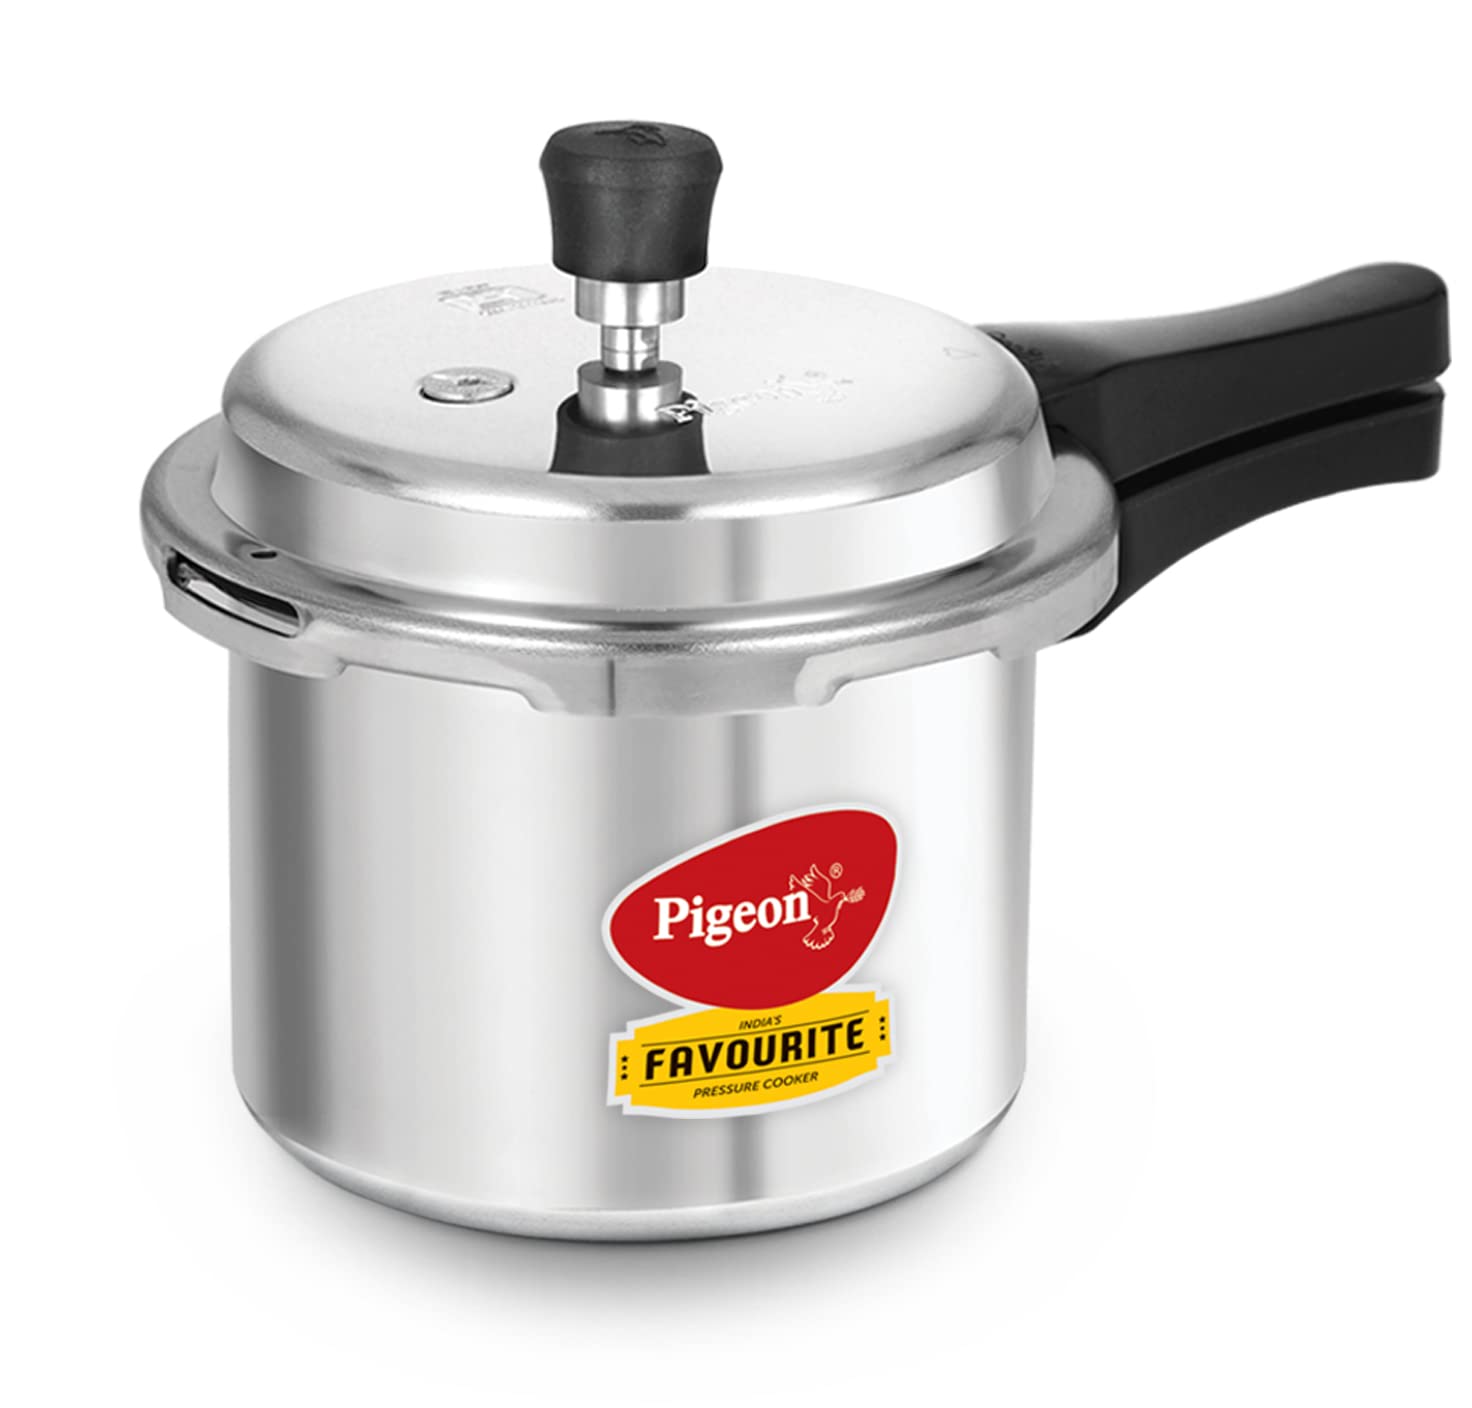 pigeon-by-stovekraft-favourite-induction-base-aluminium-pressure-cooker